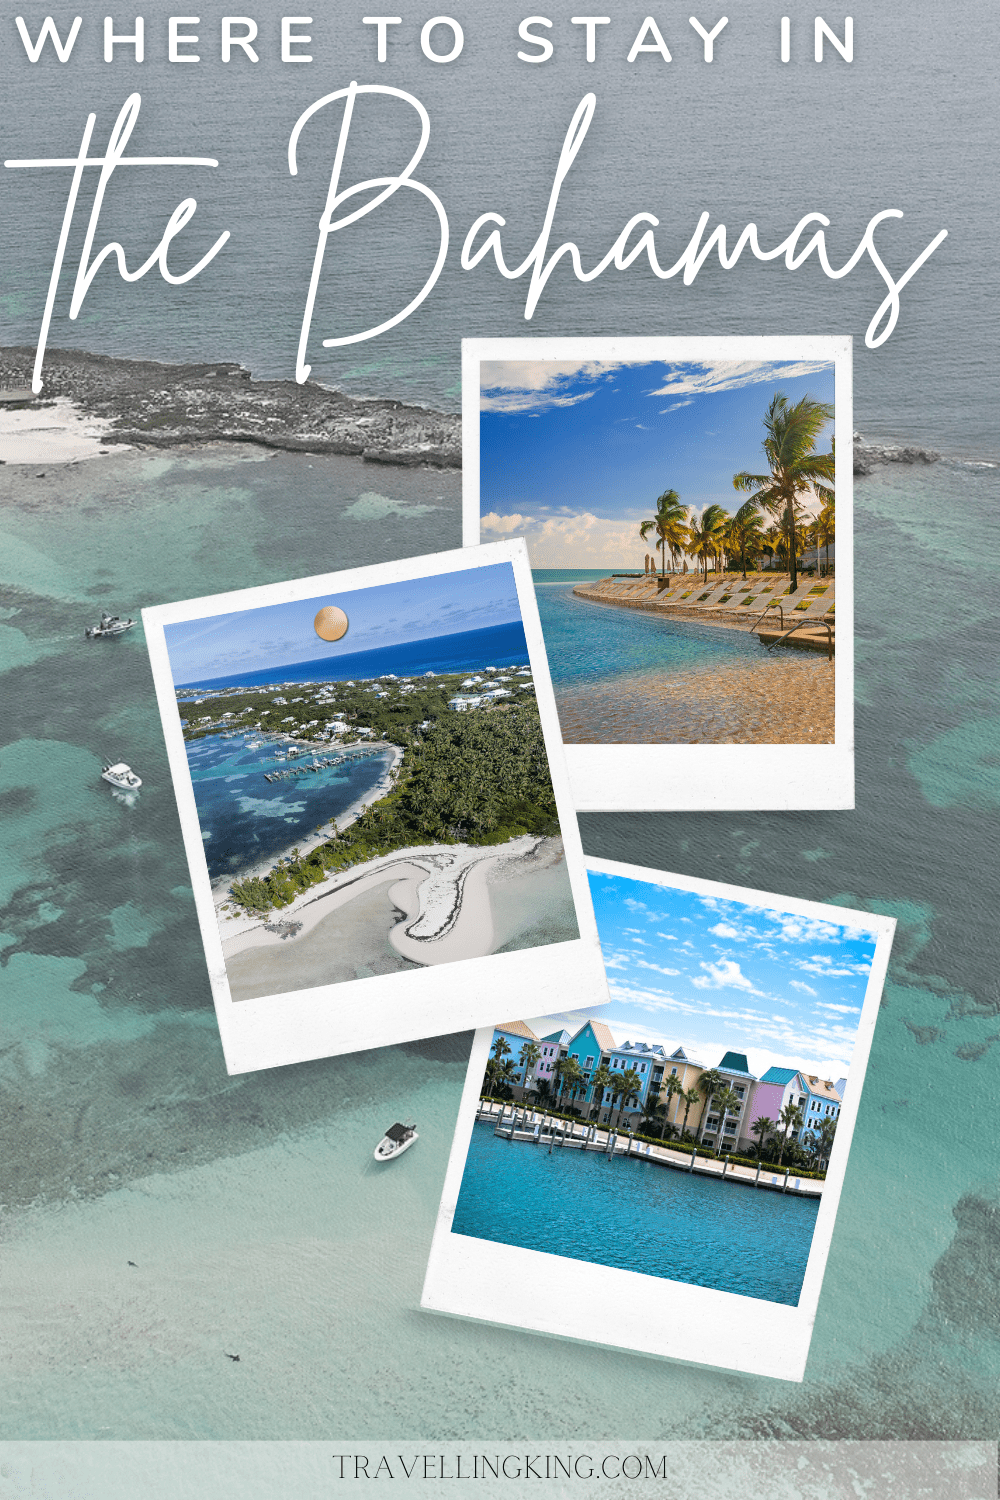 Where to stay in the Bahamas